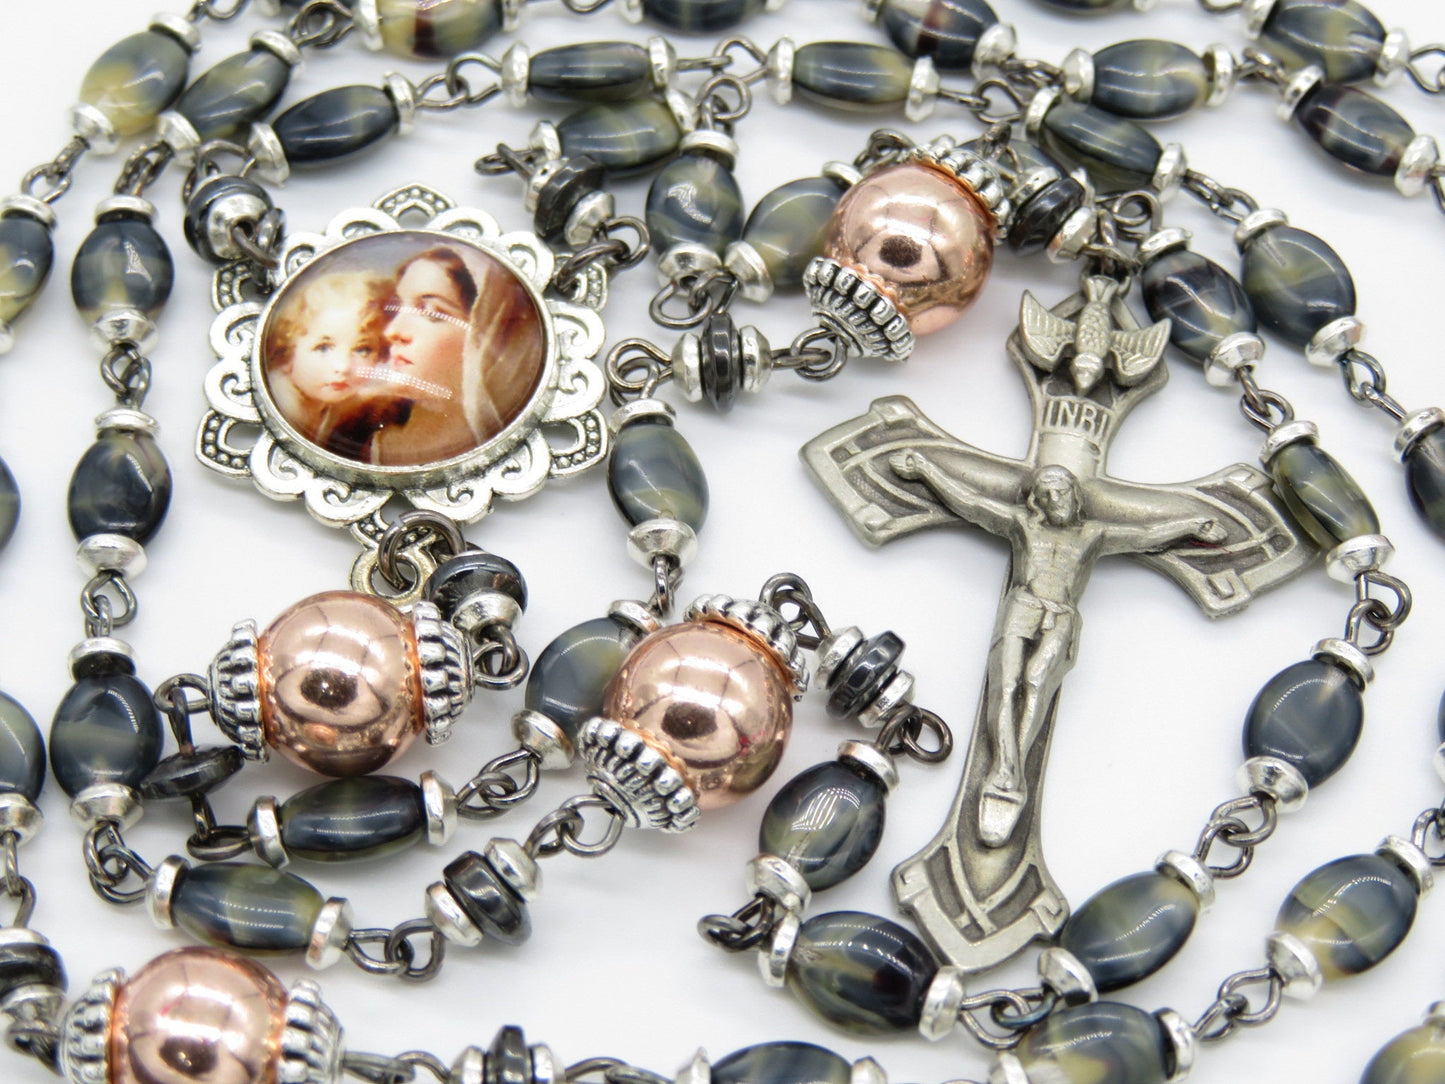 Rose Gold gemstones and glass Rosary beads, Holy Ghost Rosaries, Madonna and child Rosaries, Pewter Holy Spirit Crucifix, religious gift.